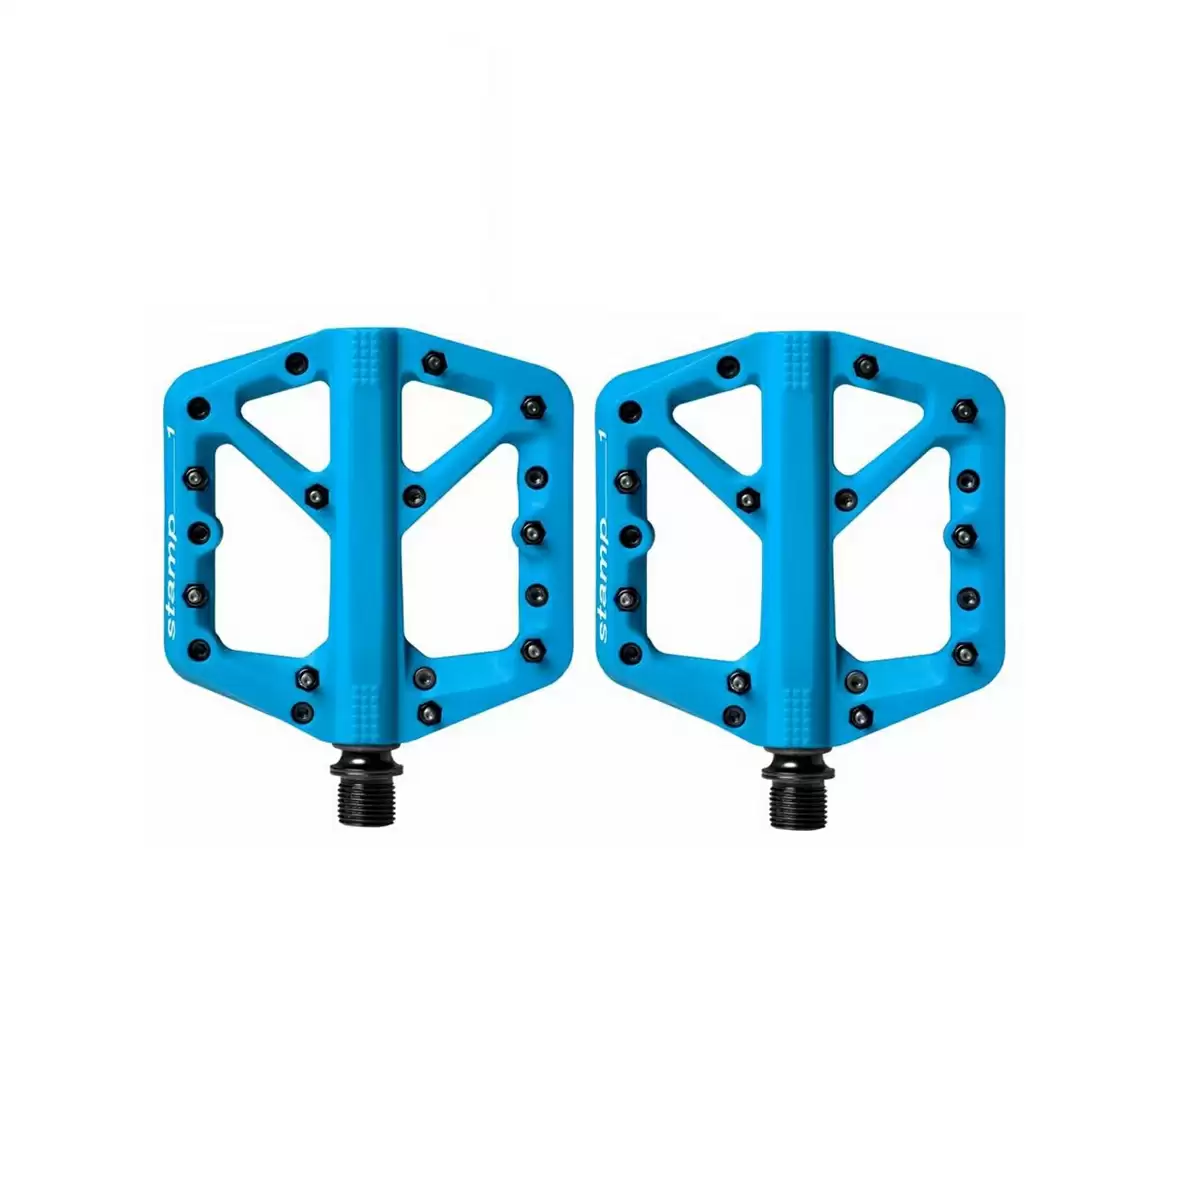 Pair of pedals Stamp 1 Large blue - image